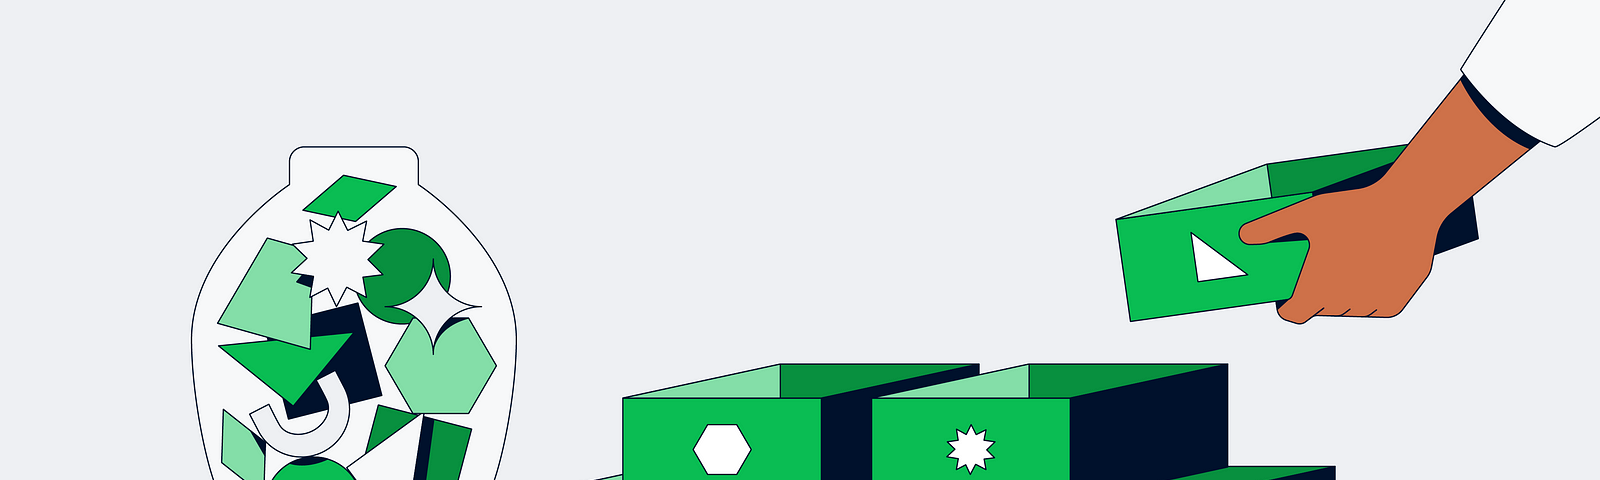 6 green boxes stack together; each box is labelled with different shapes. Beside these boxes, a transparent container filled with different shapes.